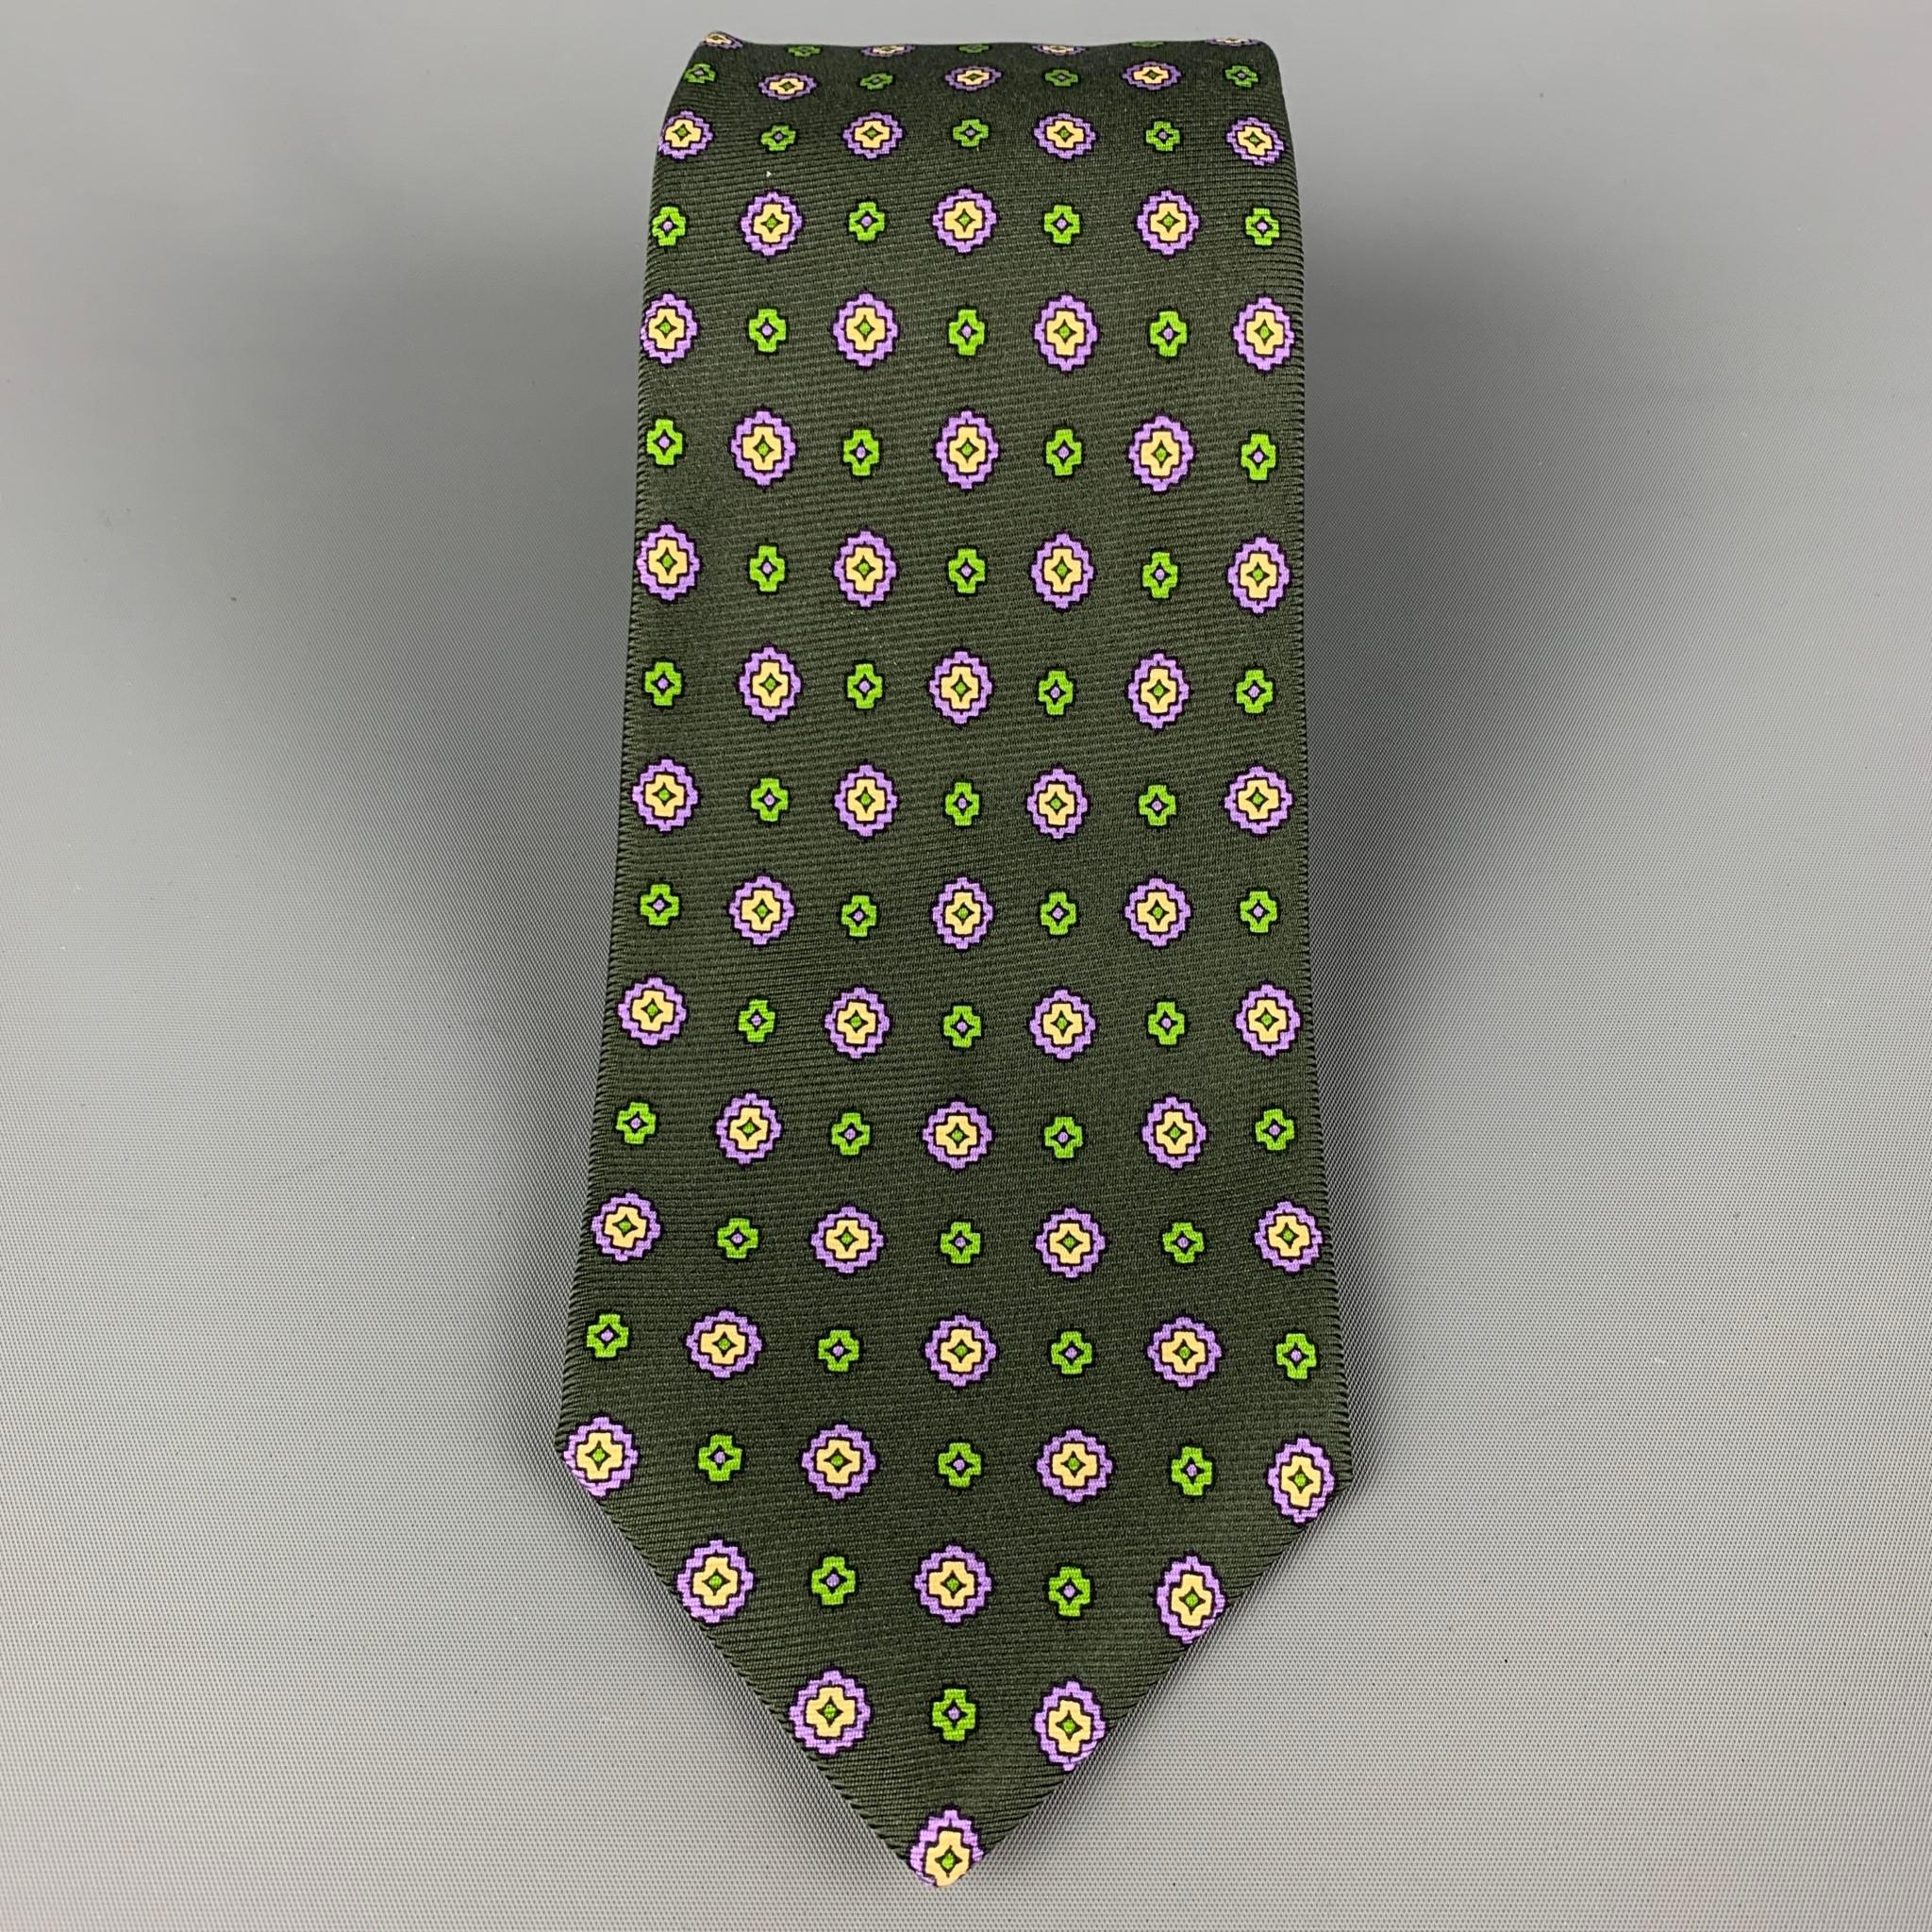 KITON necktie comes in a dark green & purple  silk with a all over abstract floral print. Made in Italy .

Very Good Pre-Owned Condition.
Original Retail Price: $345.00

Width: 4 in.
Length: 61 in. 

 